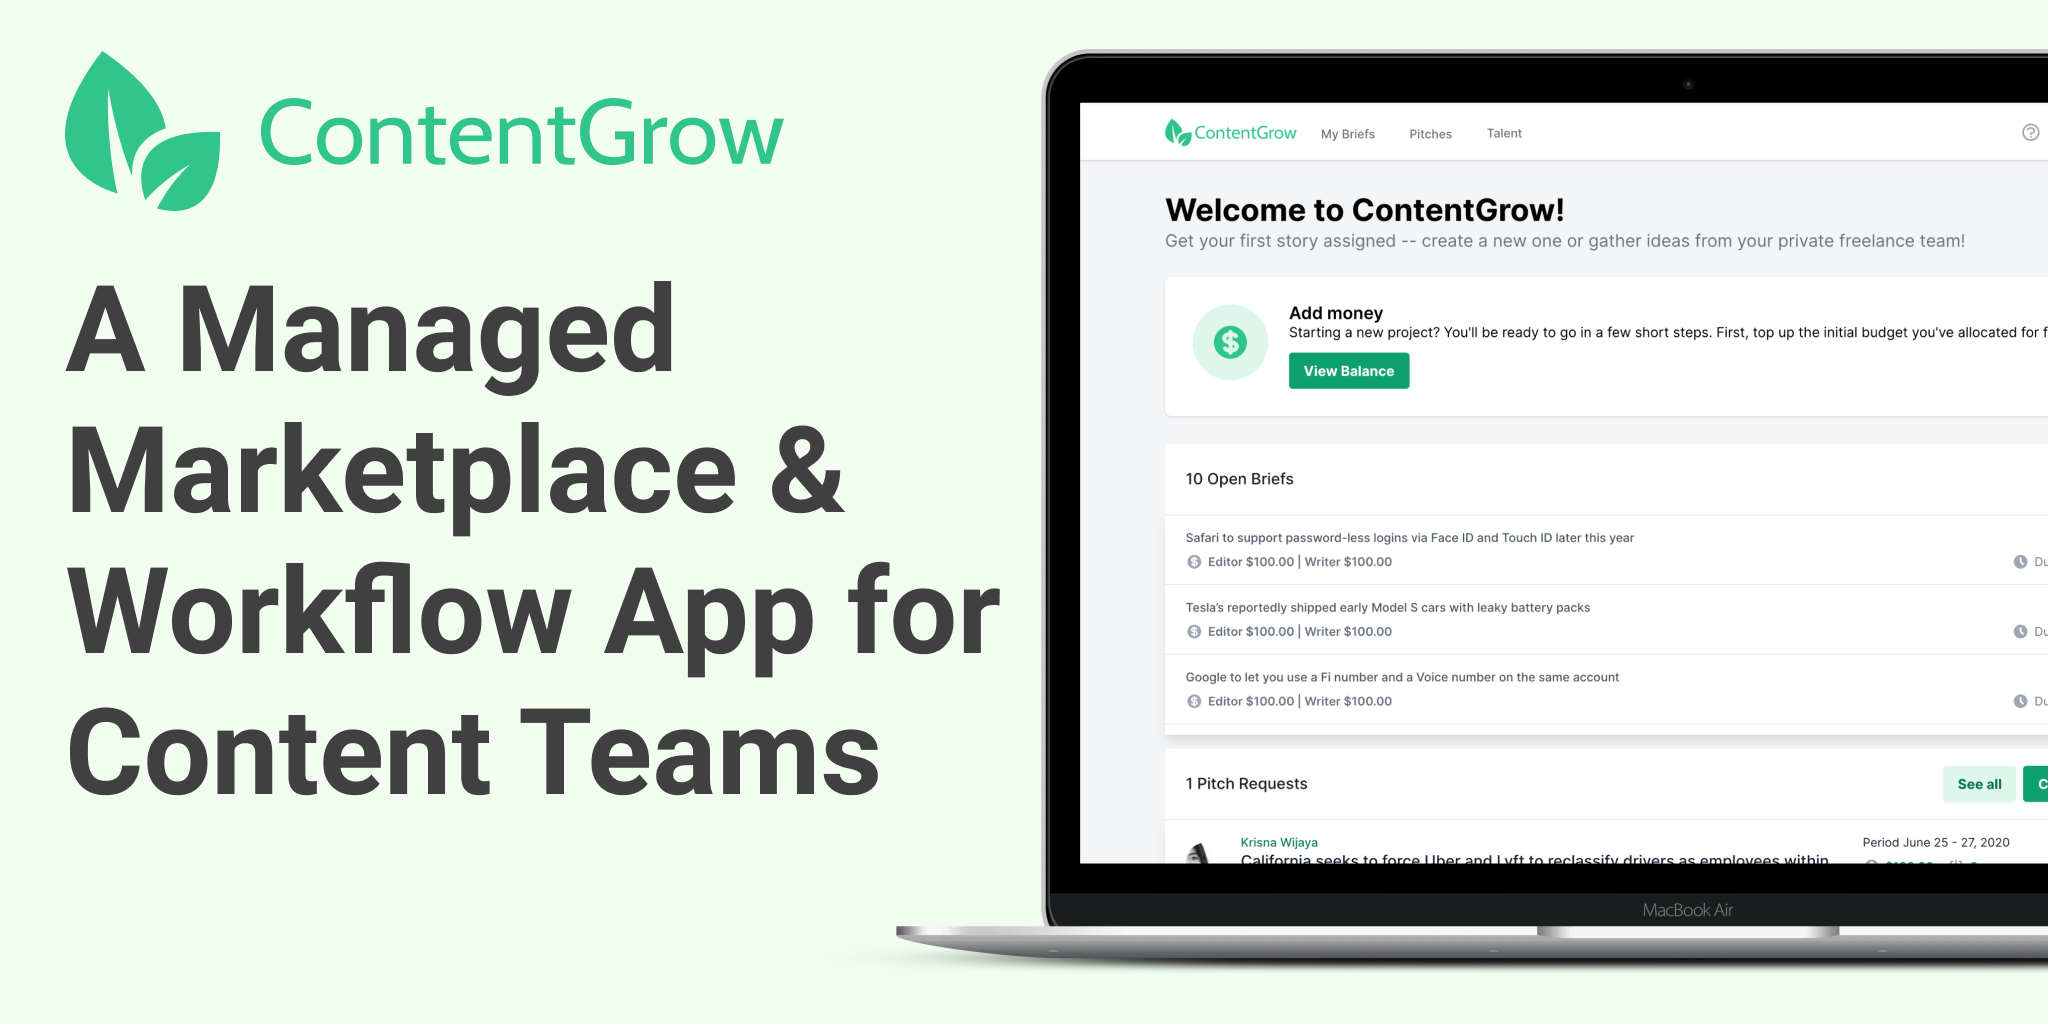 hire freelance writers and journalists on ContentGrow